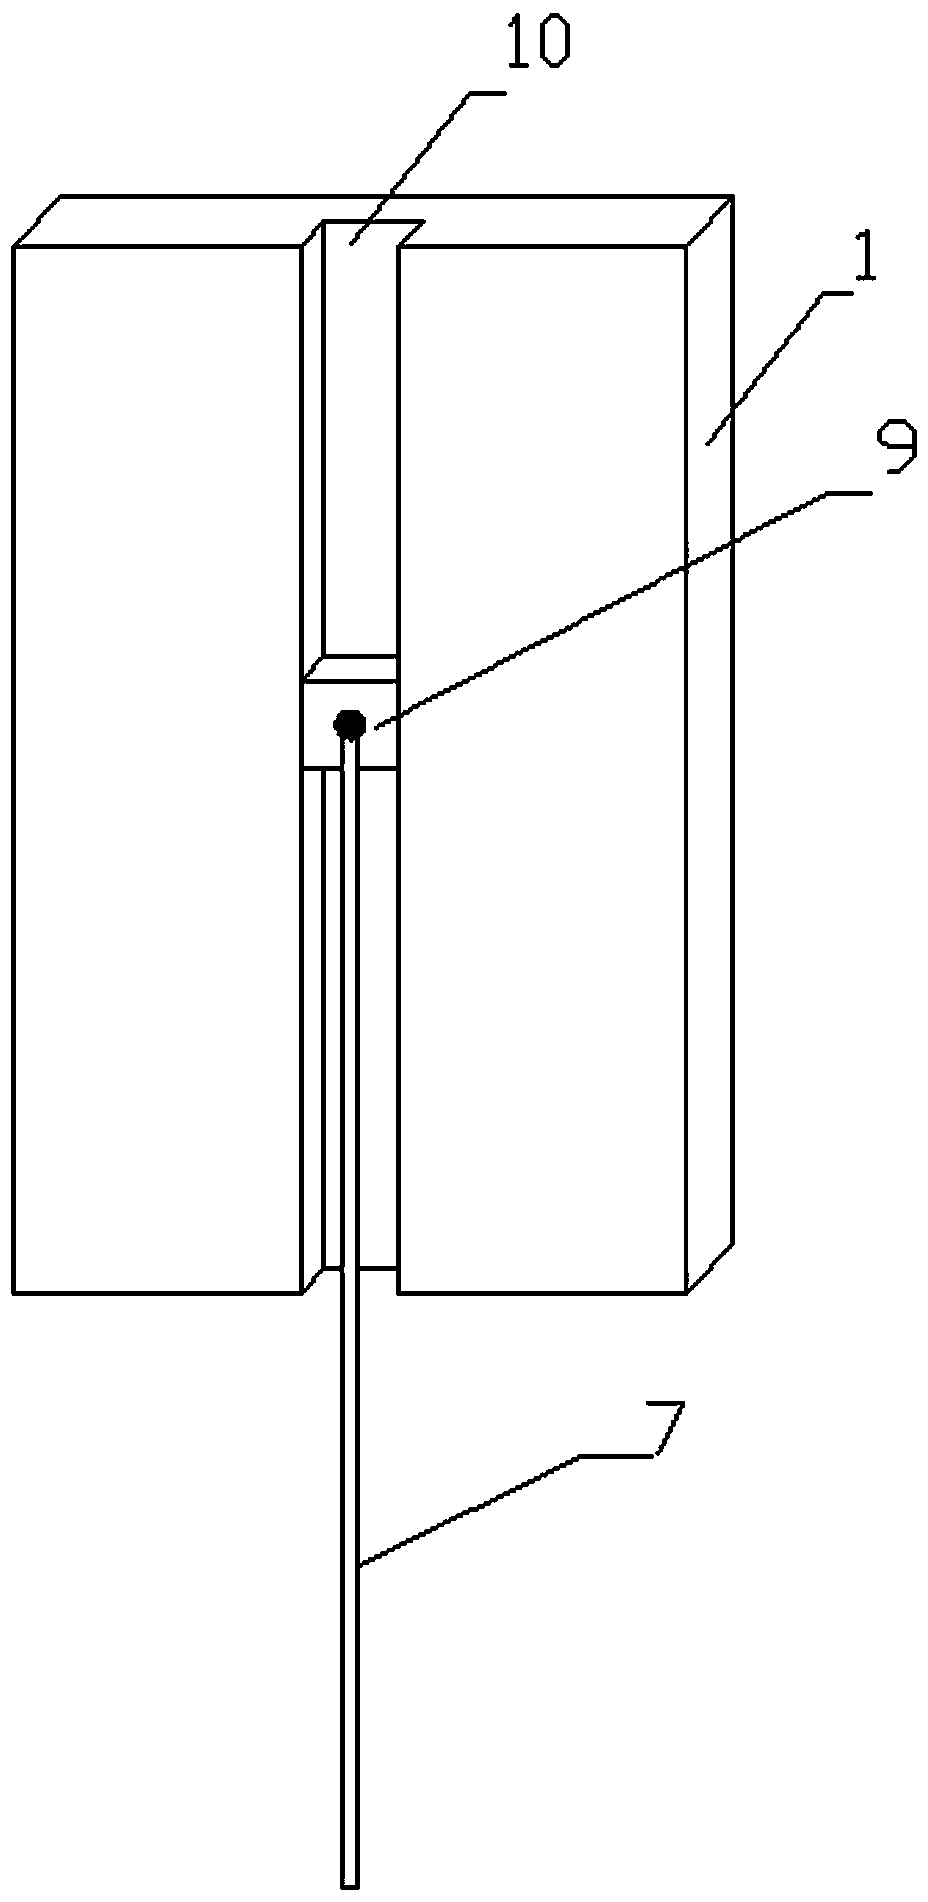 A slope test device with adjustable slope